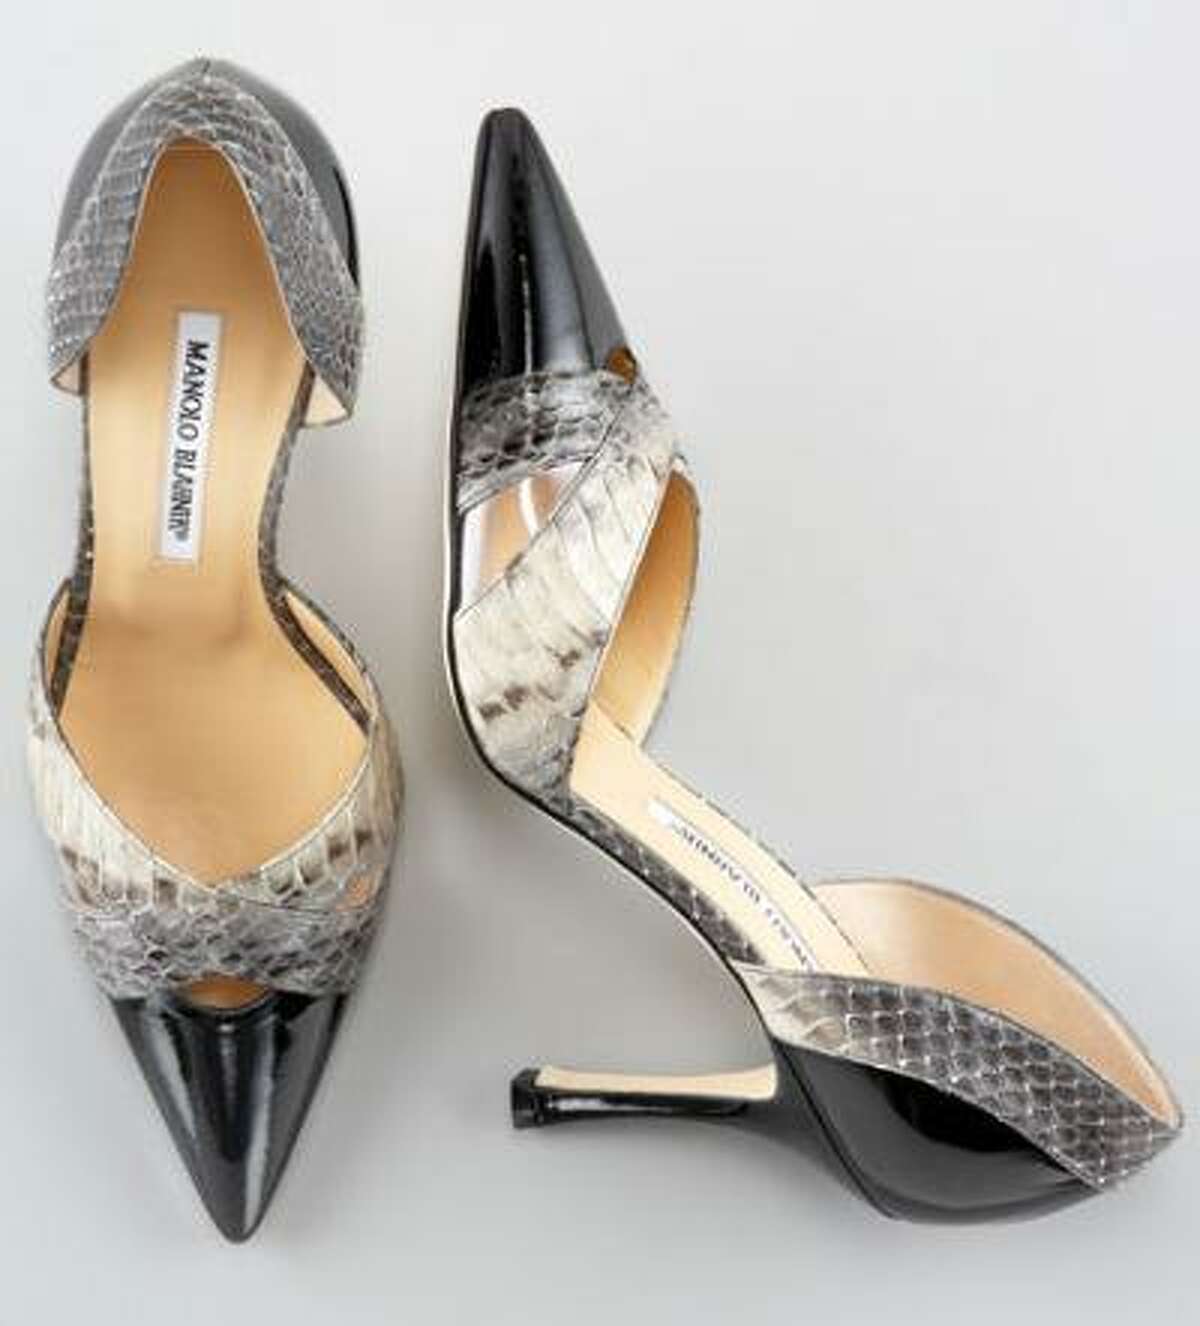 Manolo Blahnik snake-embossed d'Orsay shoes from the Fall 2011 collection. (Journal Register News Service)